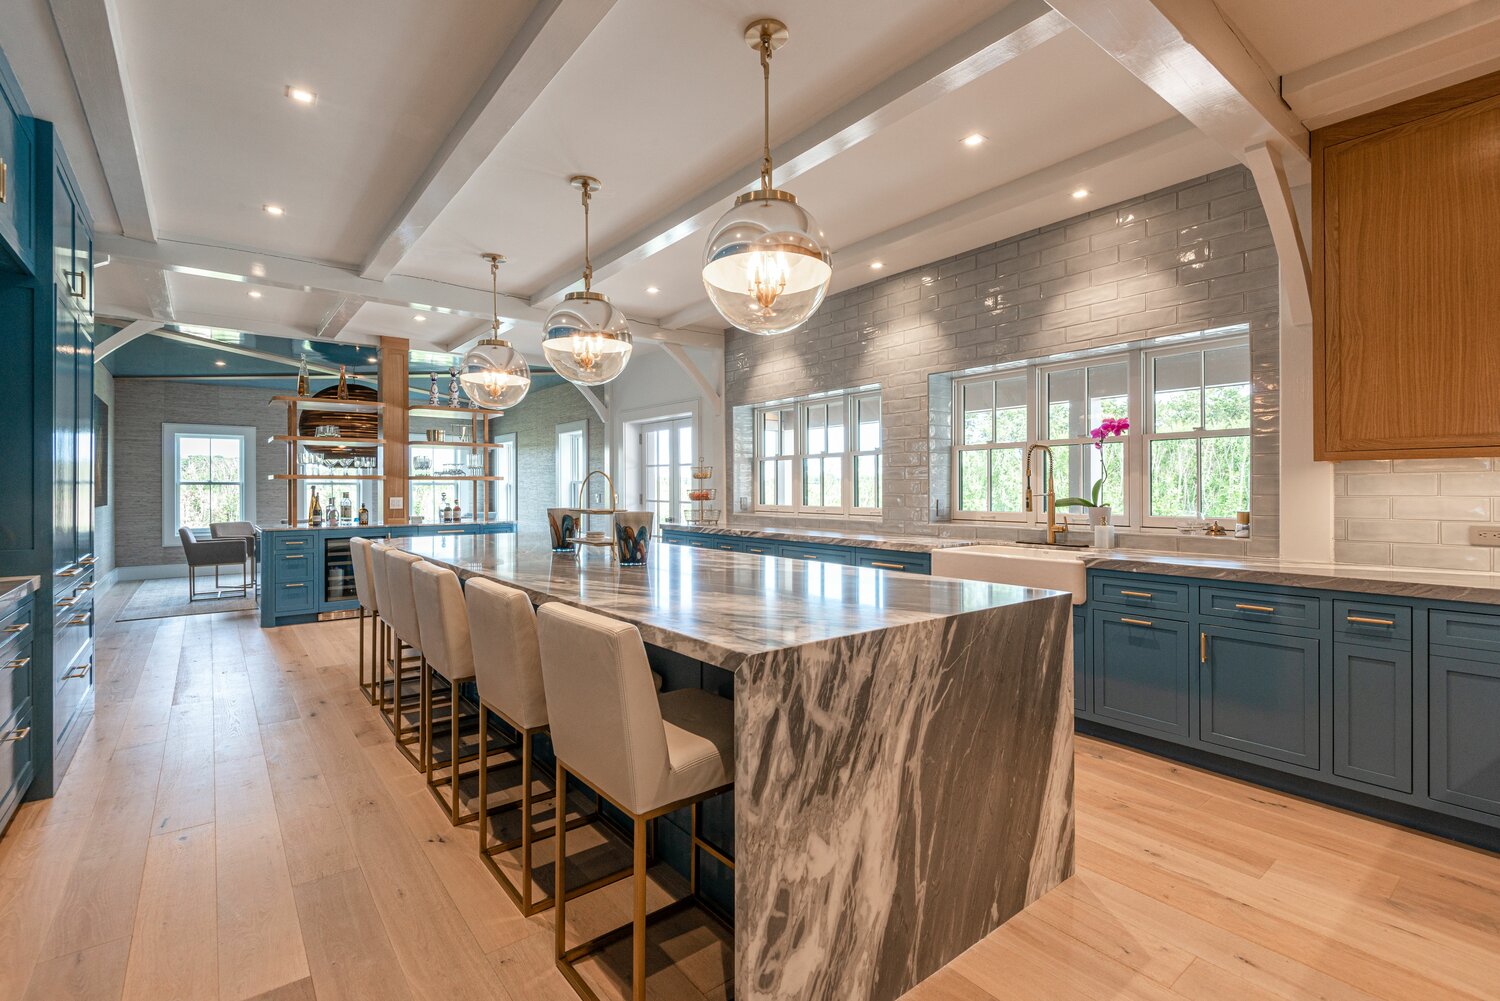 The spacious gourmet kitchen has an abundance of counter space and storage, high-end appliances and a bar area with wine chiller and exposed shelves.